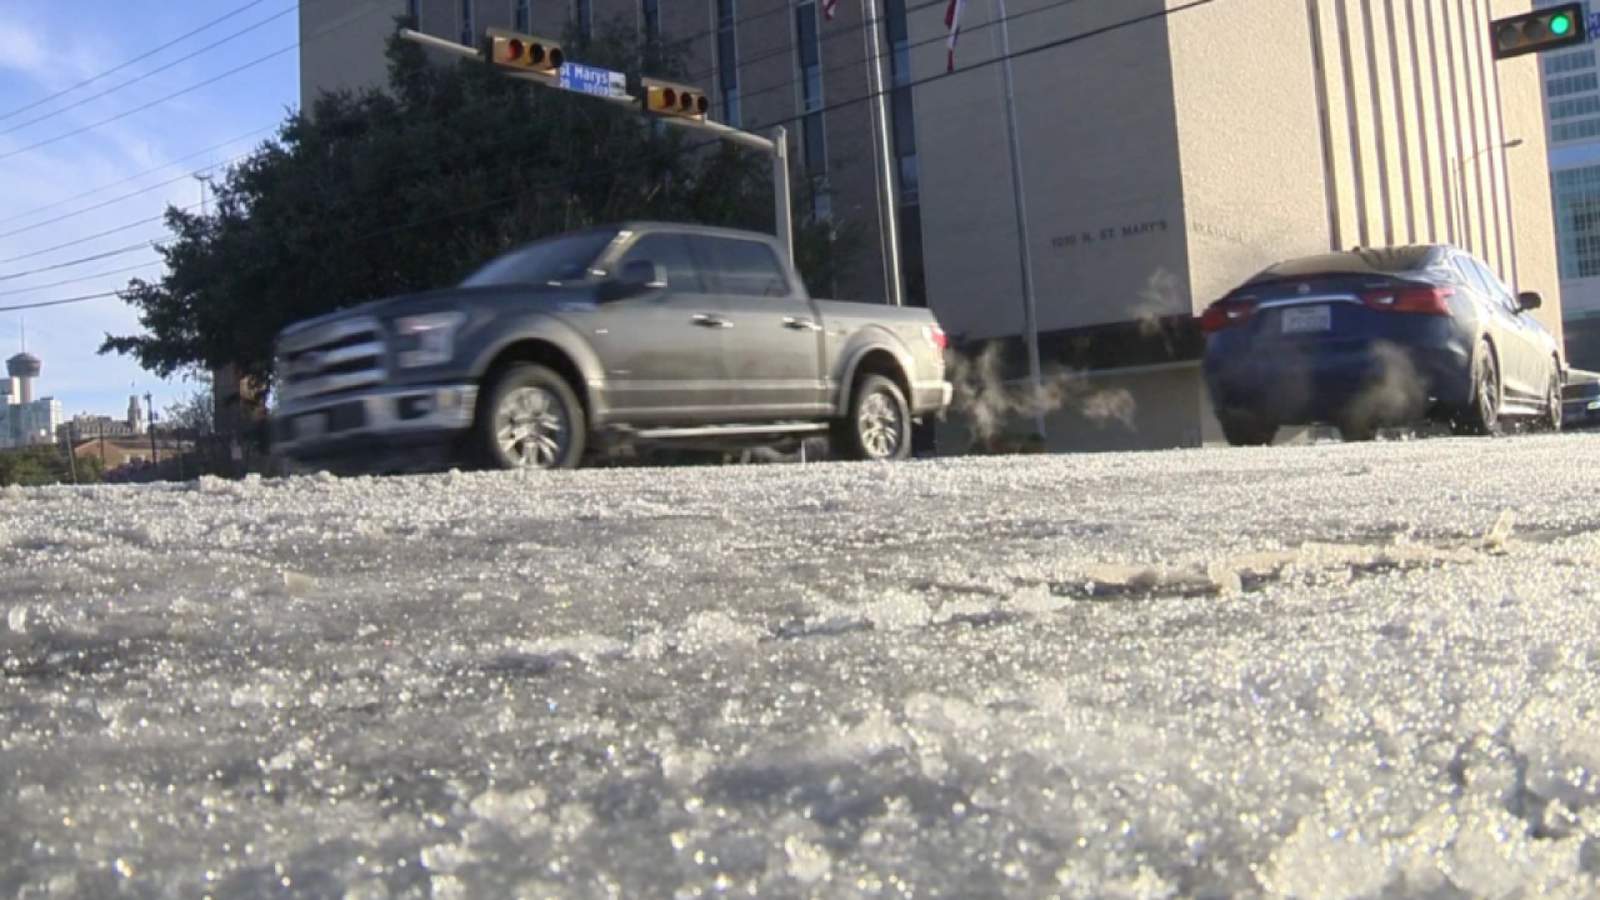 TxDOT urges people to stay off roads due to dangerous icy conditions across San Antonio area; New Braunfels streets impassable